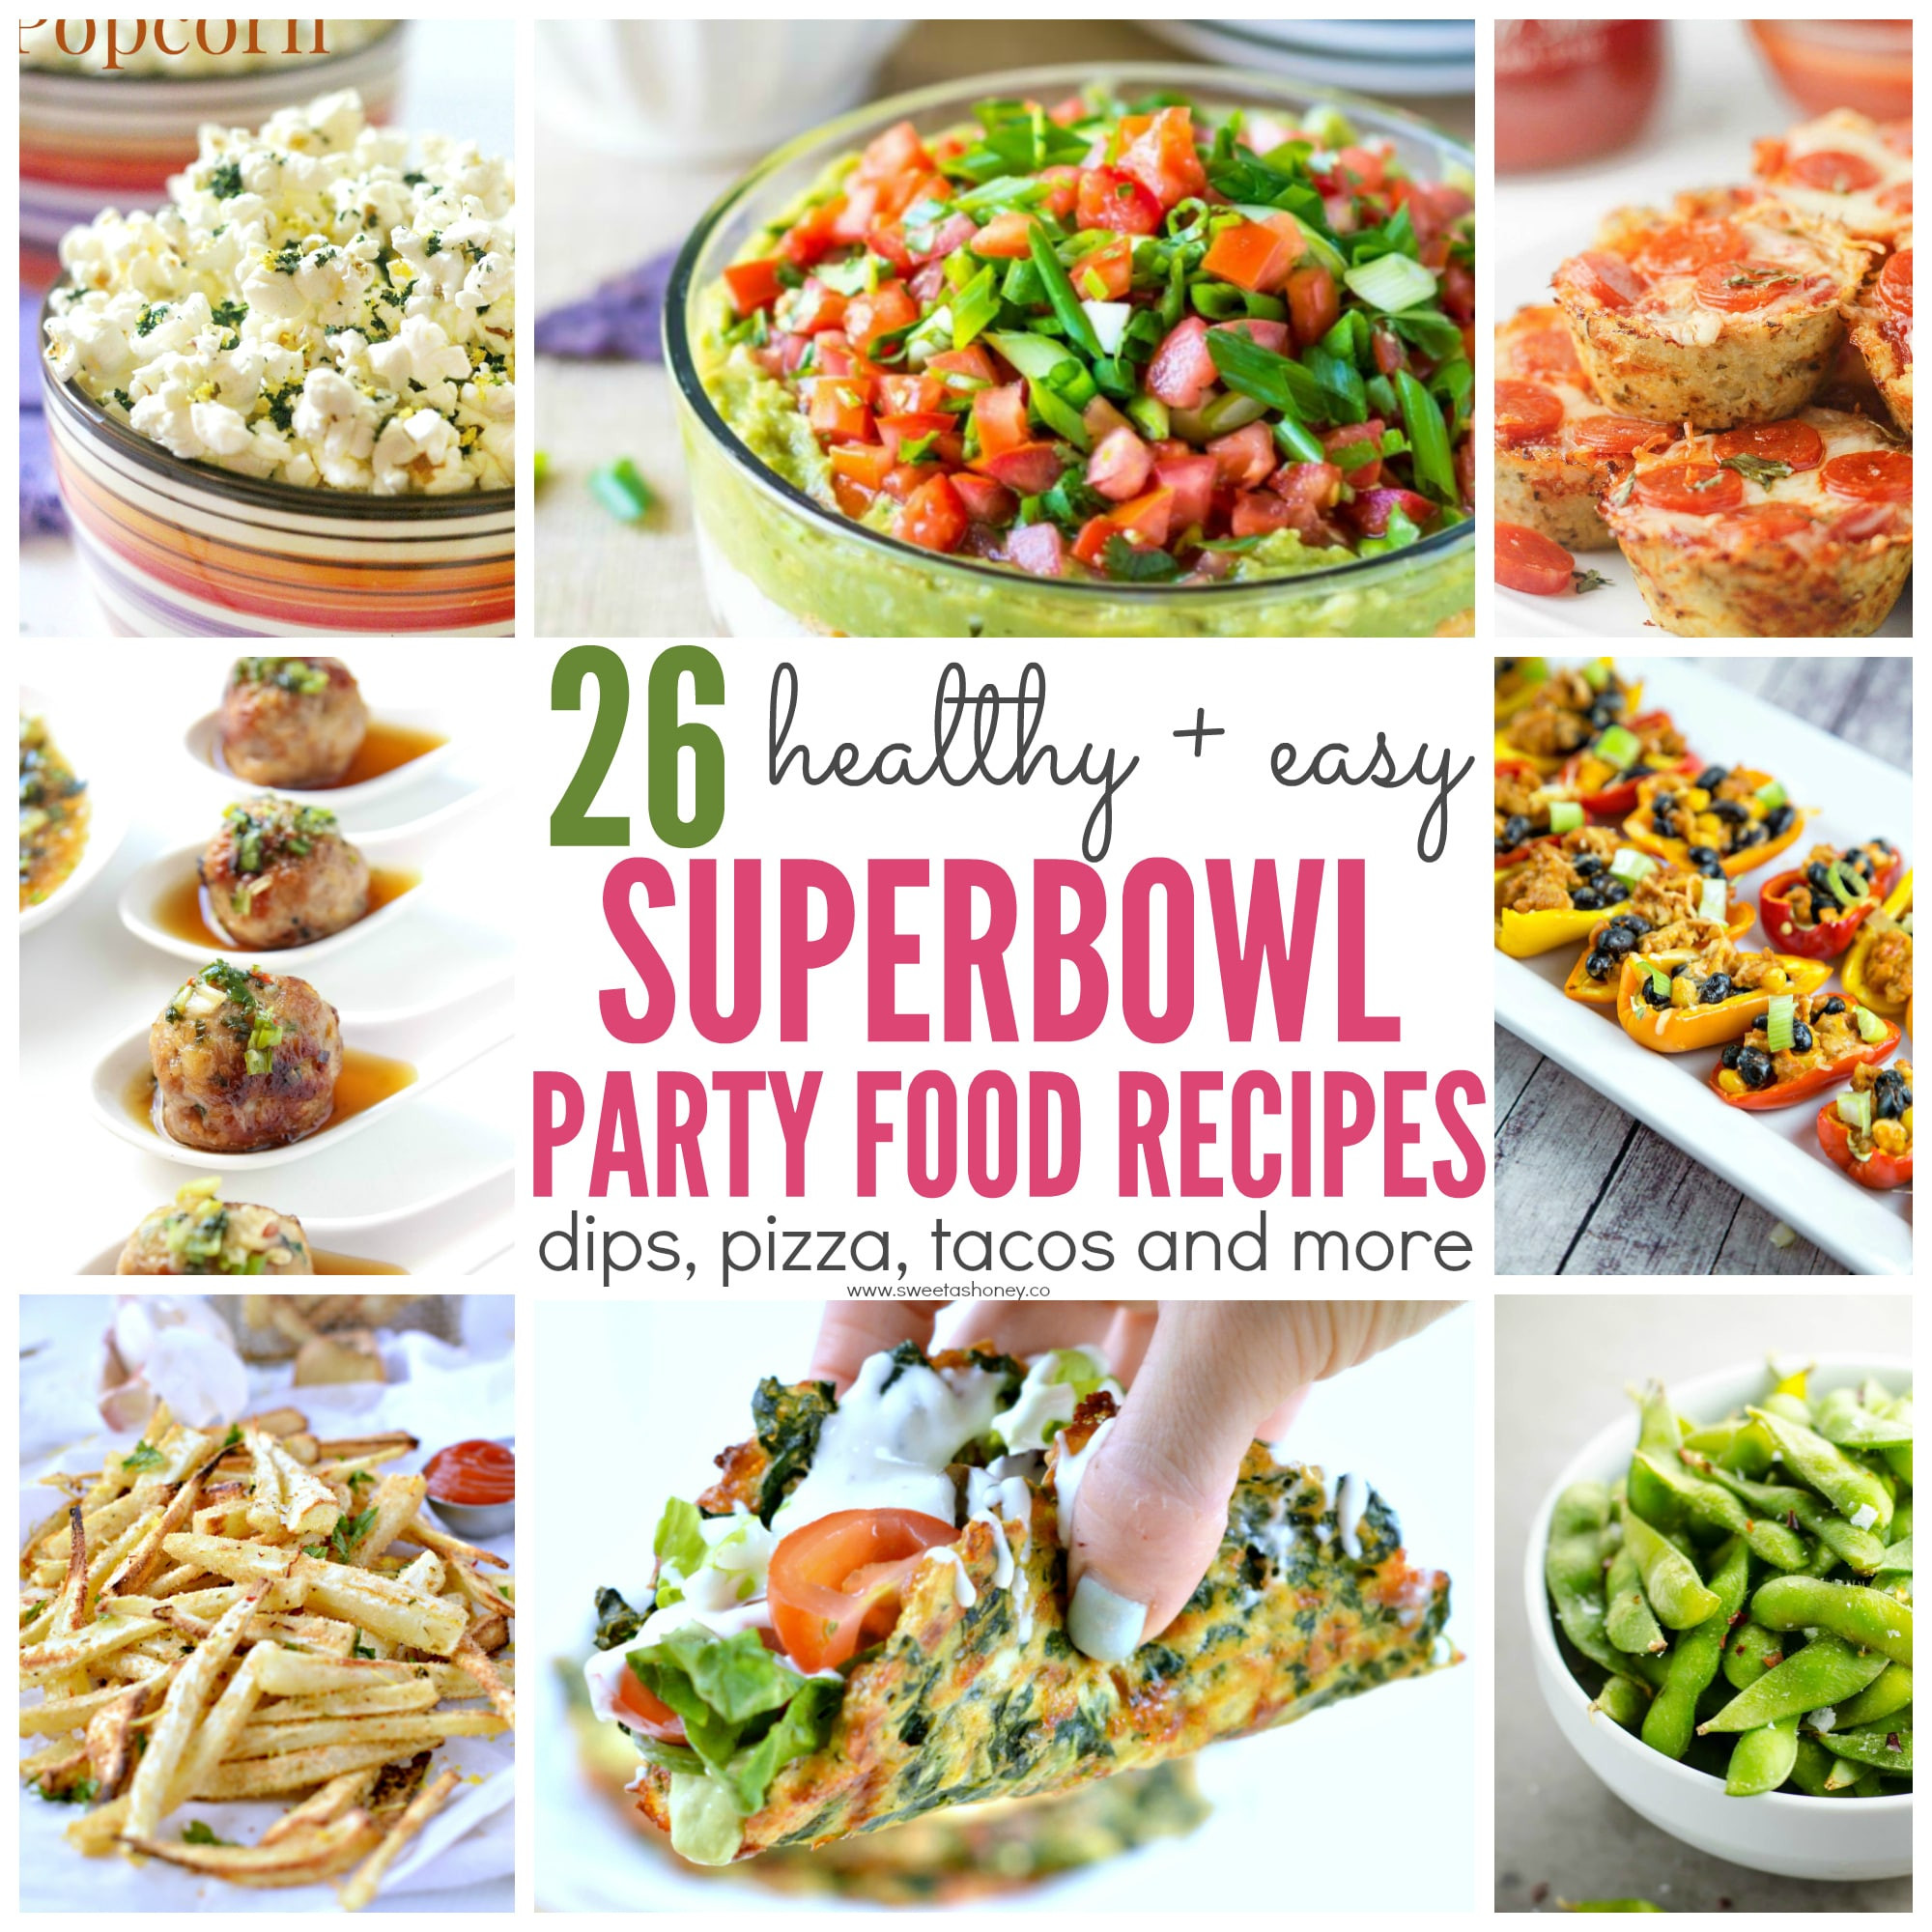 Healthy Super Bowl Party Food Ideas
 26 Healthy Superbowl Party Food Recipes Sweet and Savory